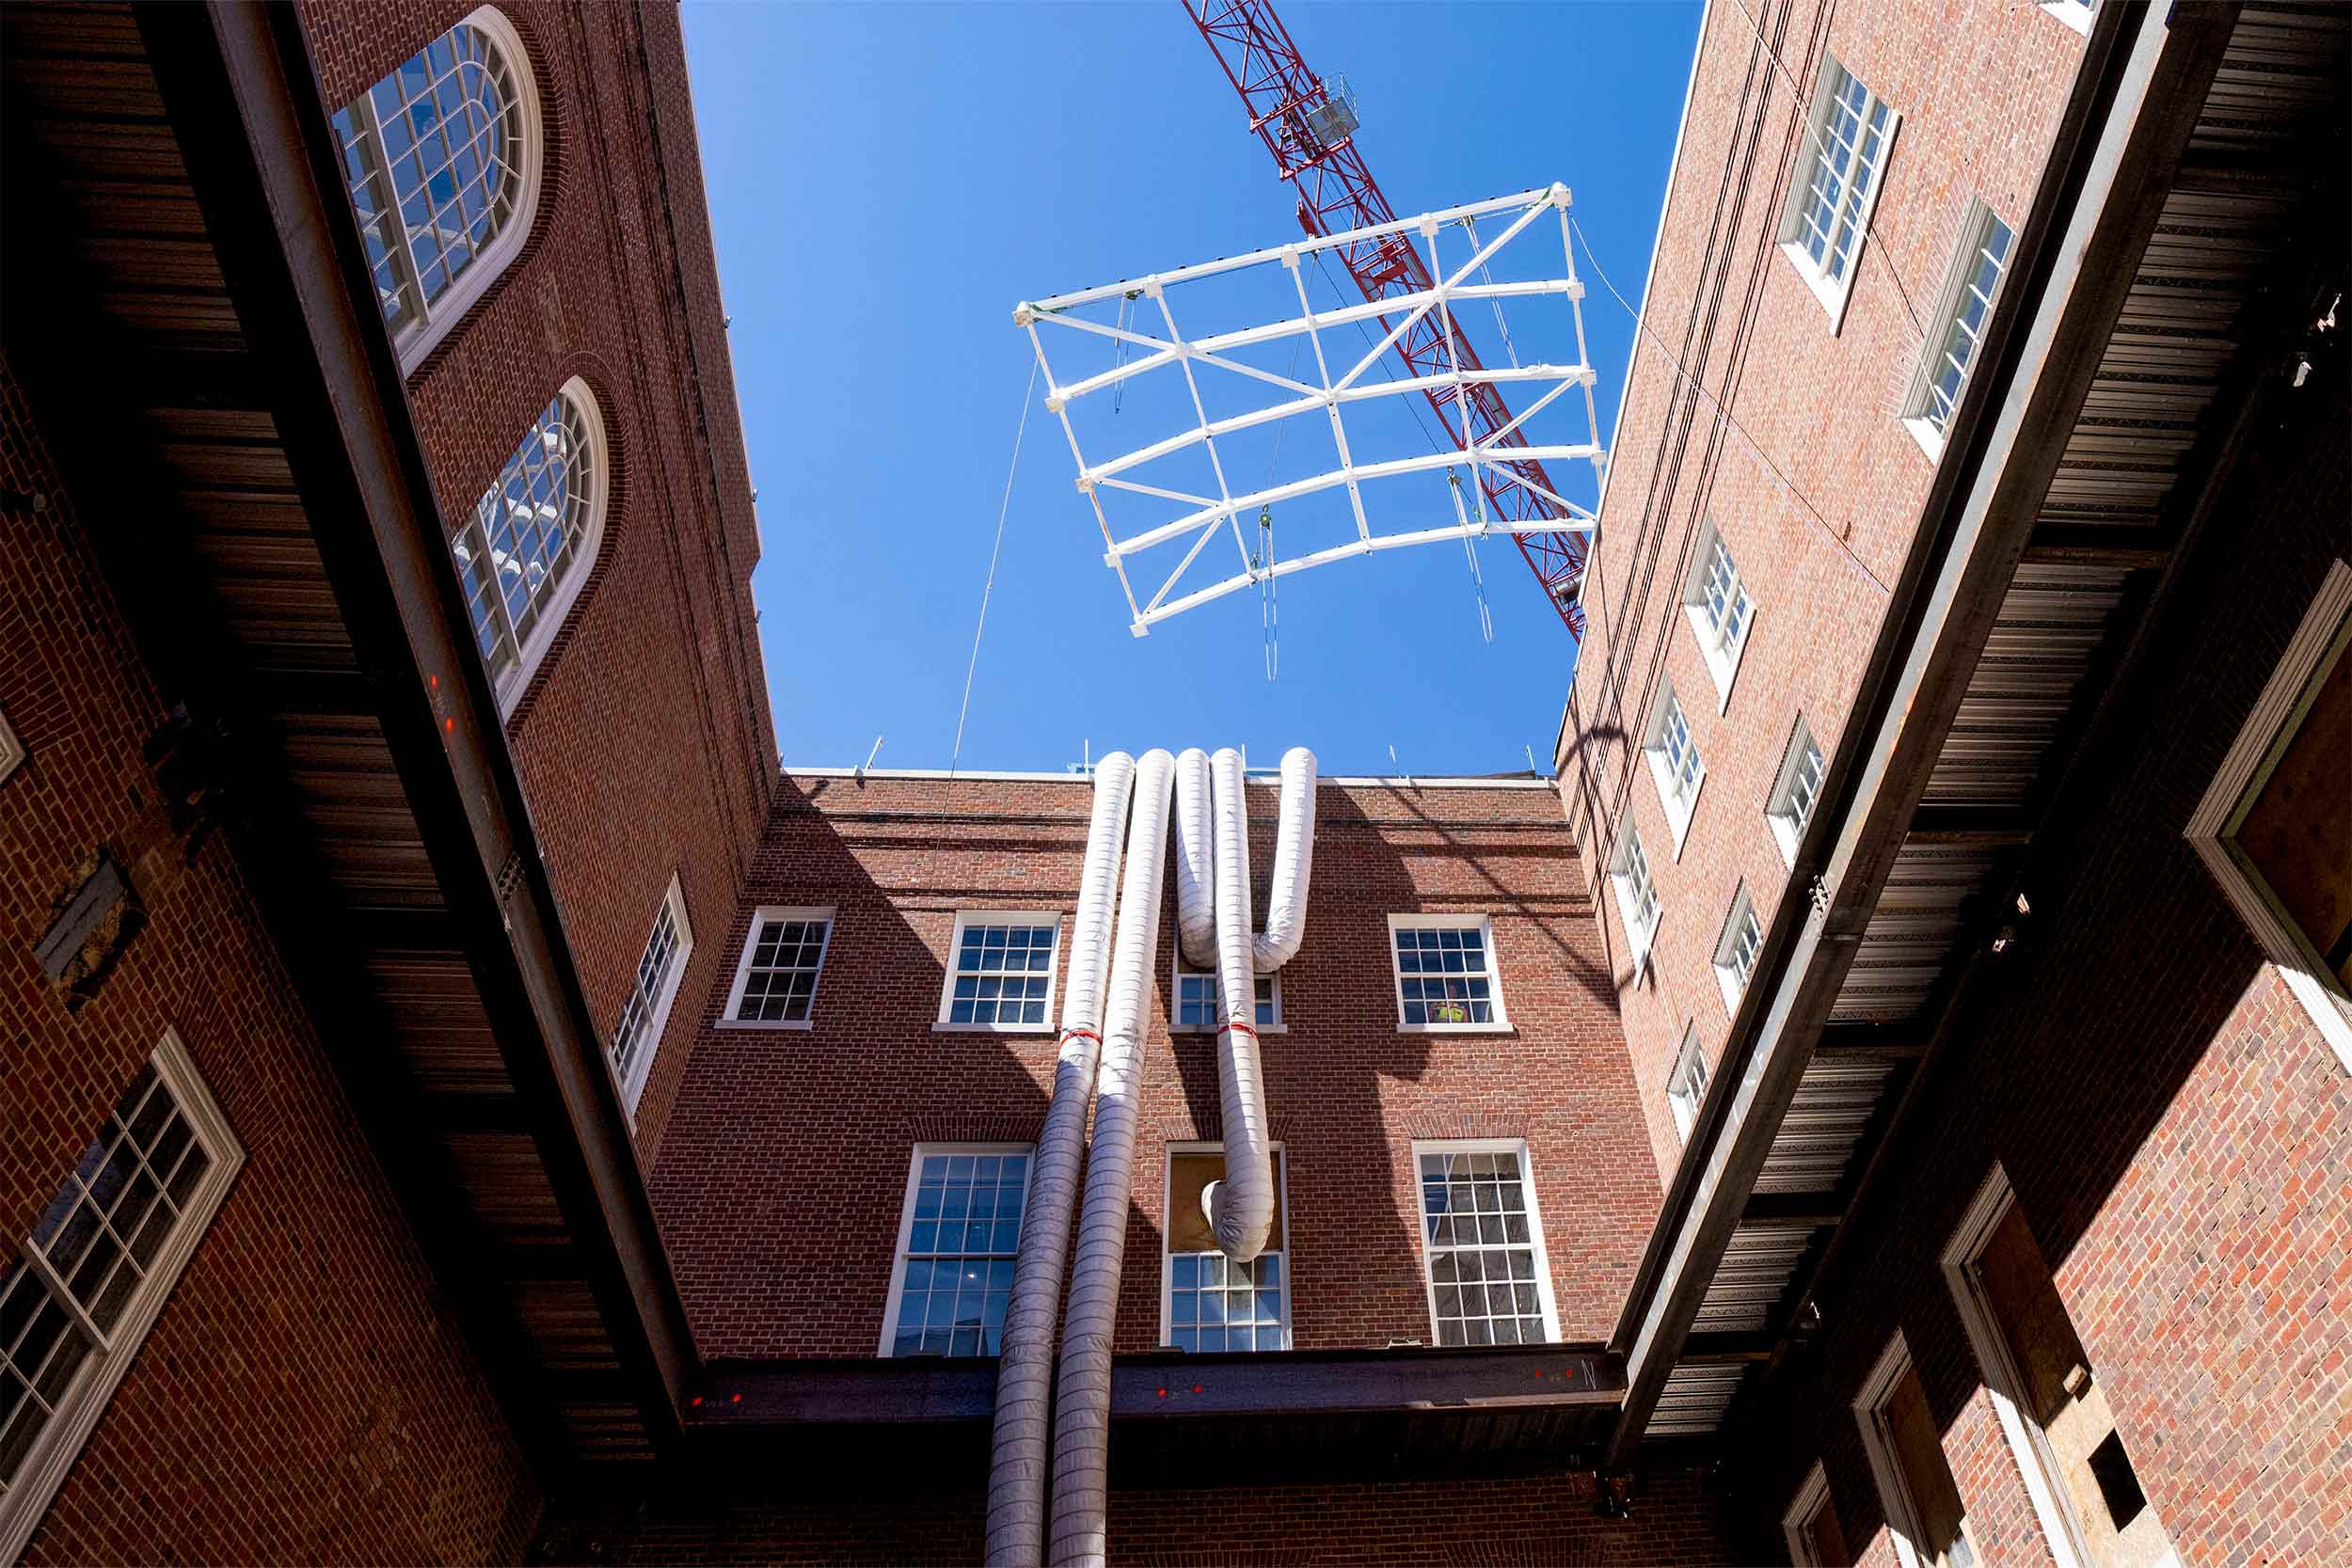 A frame is lowered into the library courtyard